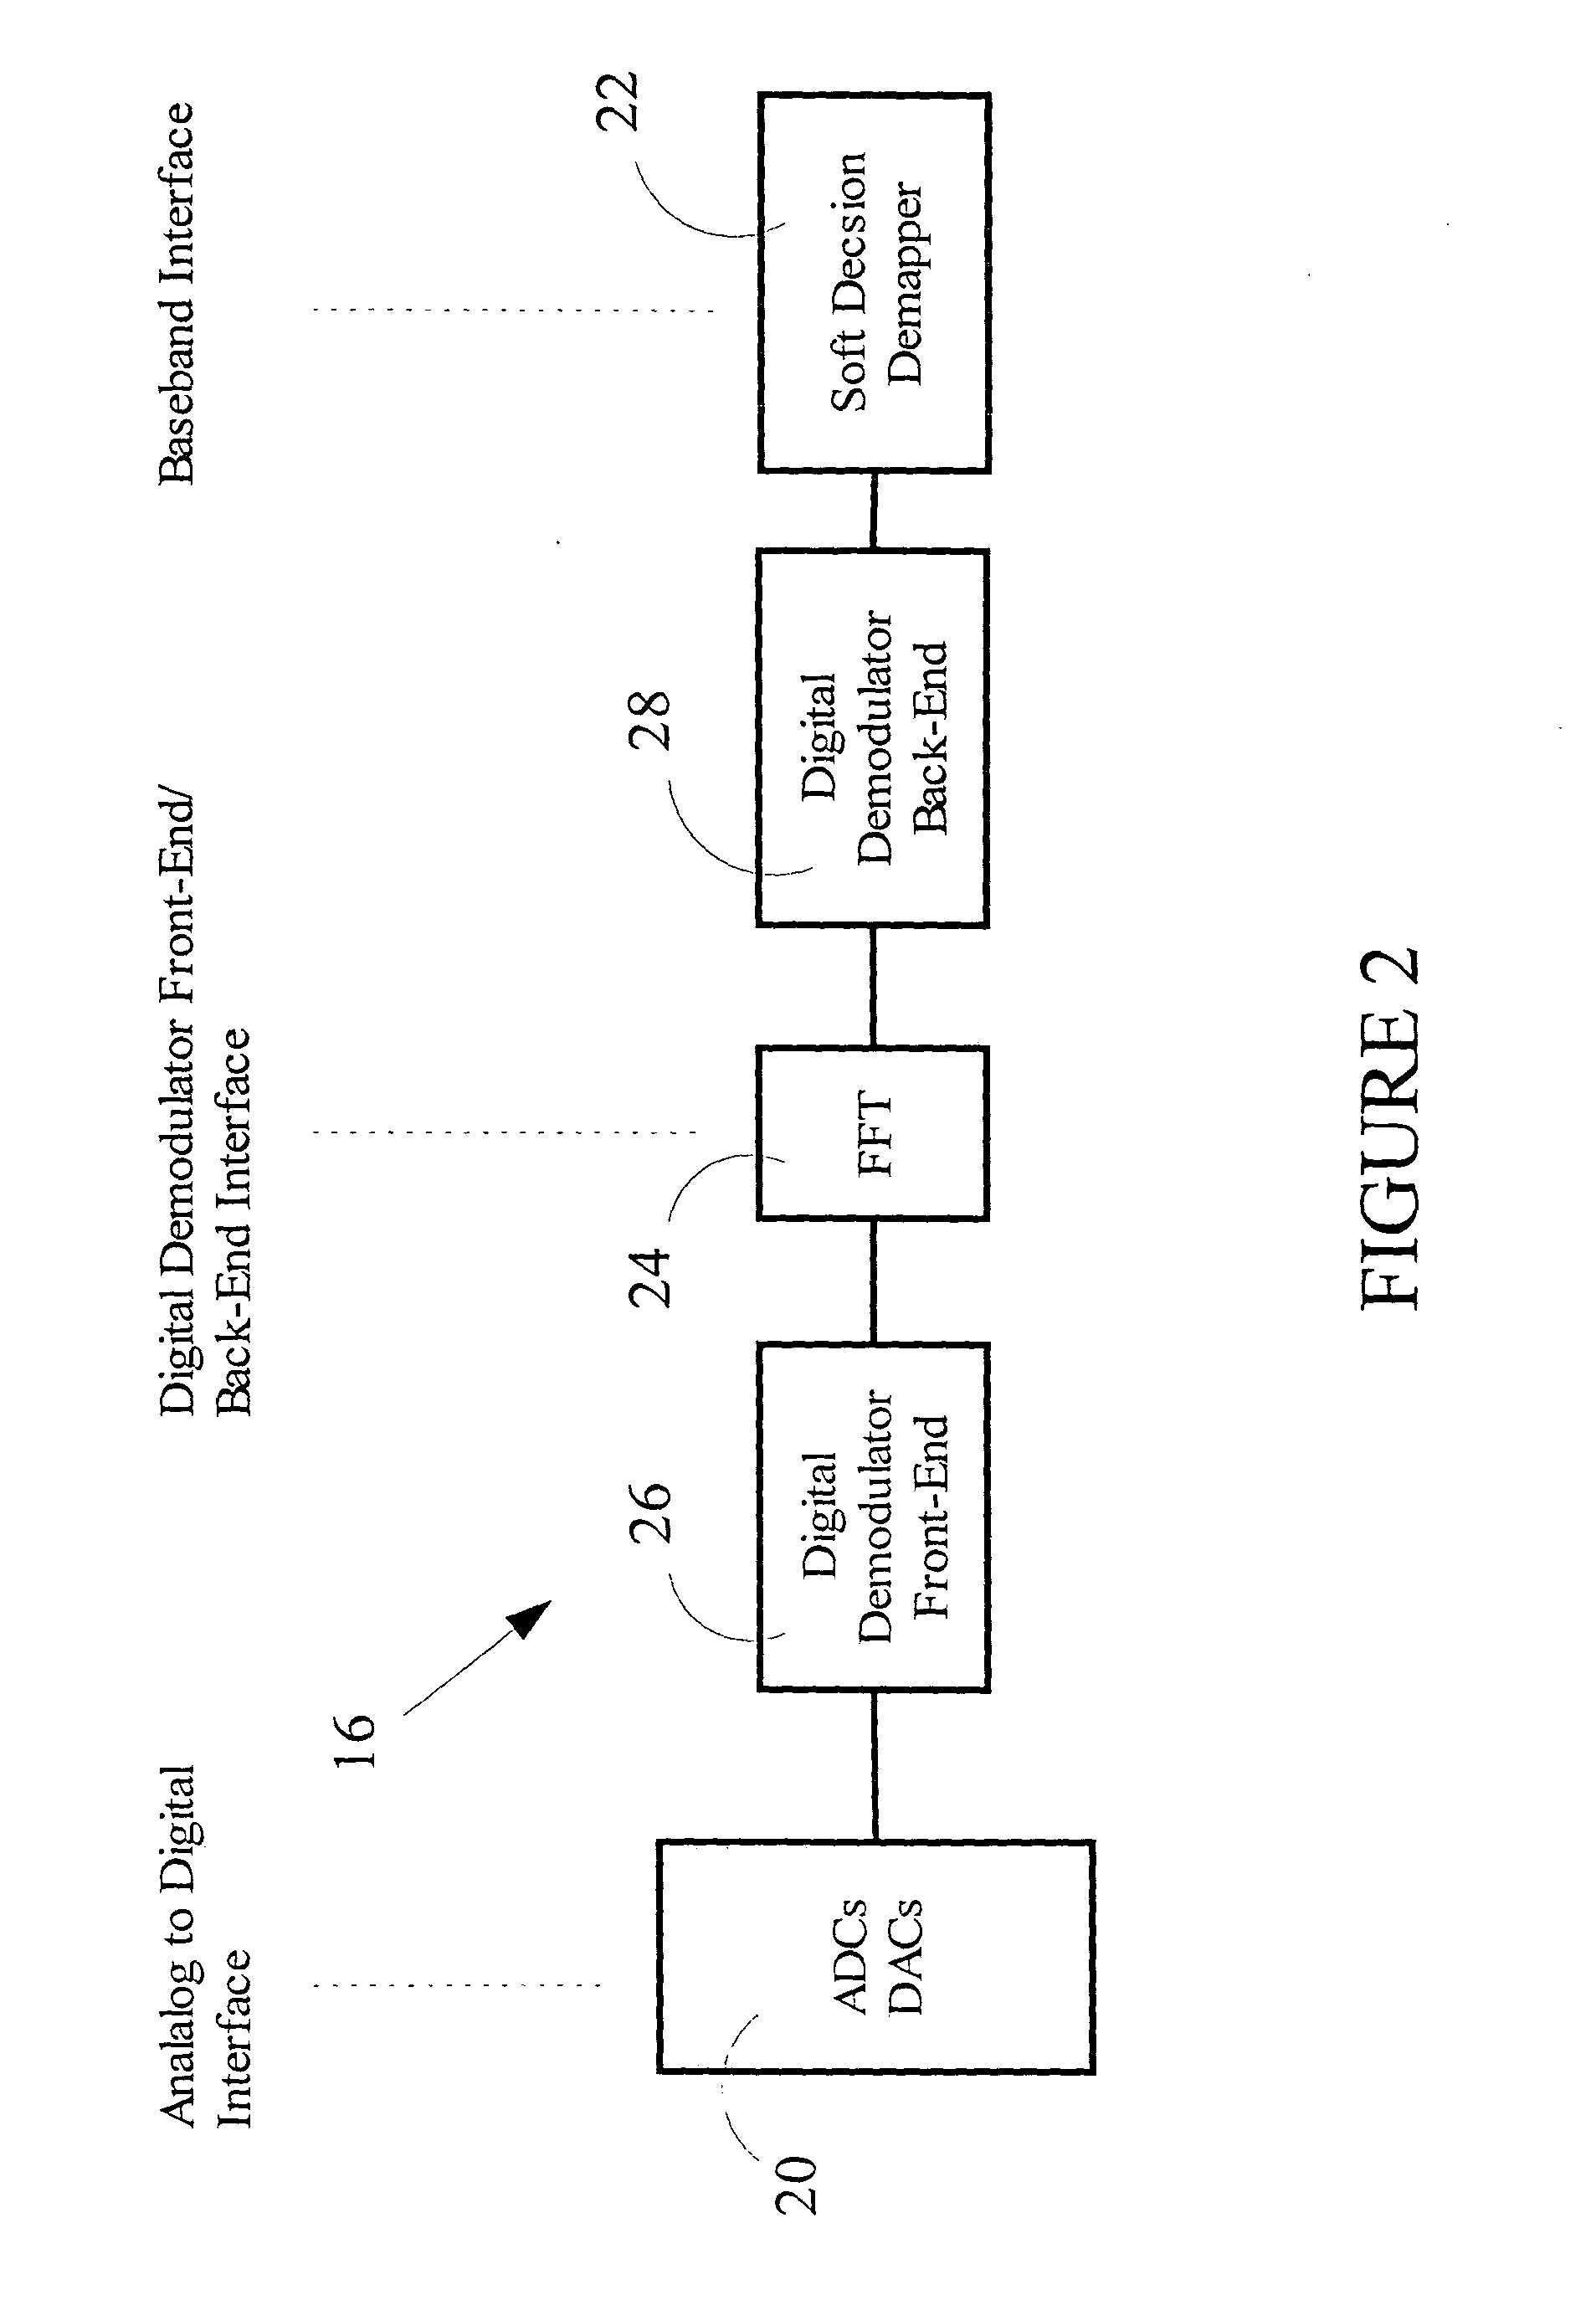 Method for amplitude insensitive packet detection